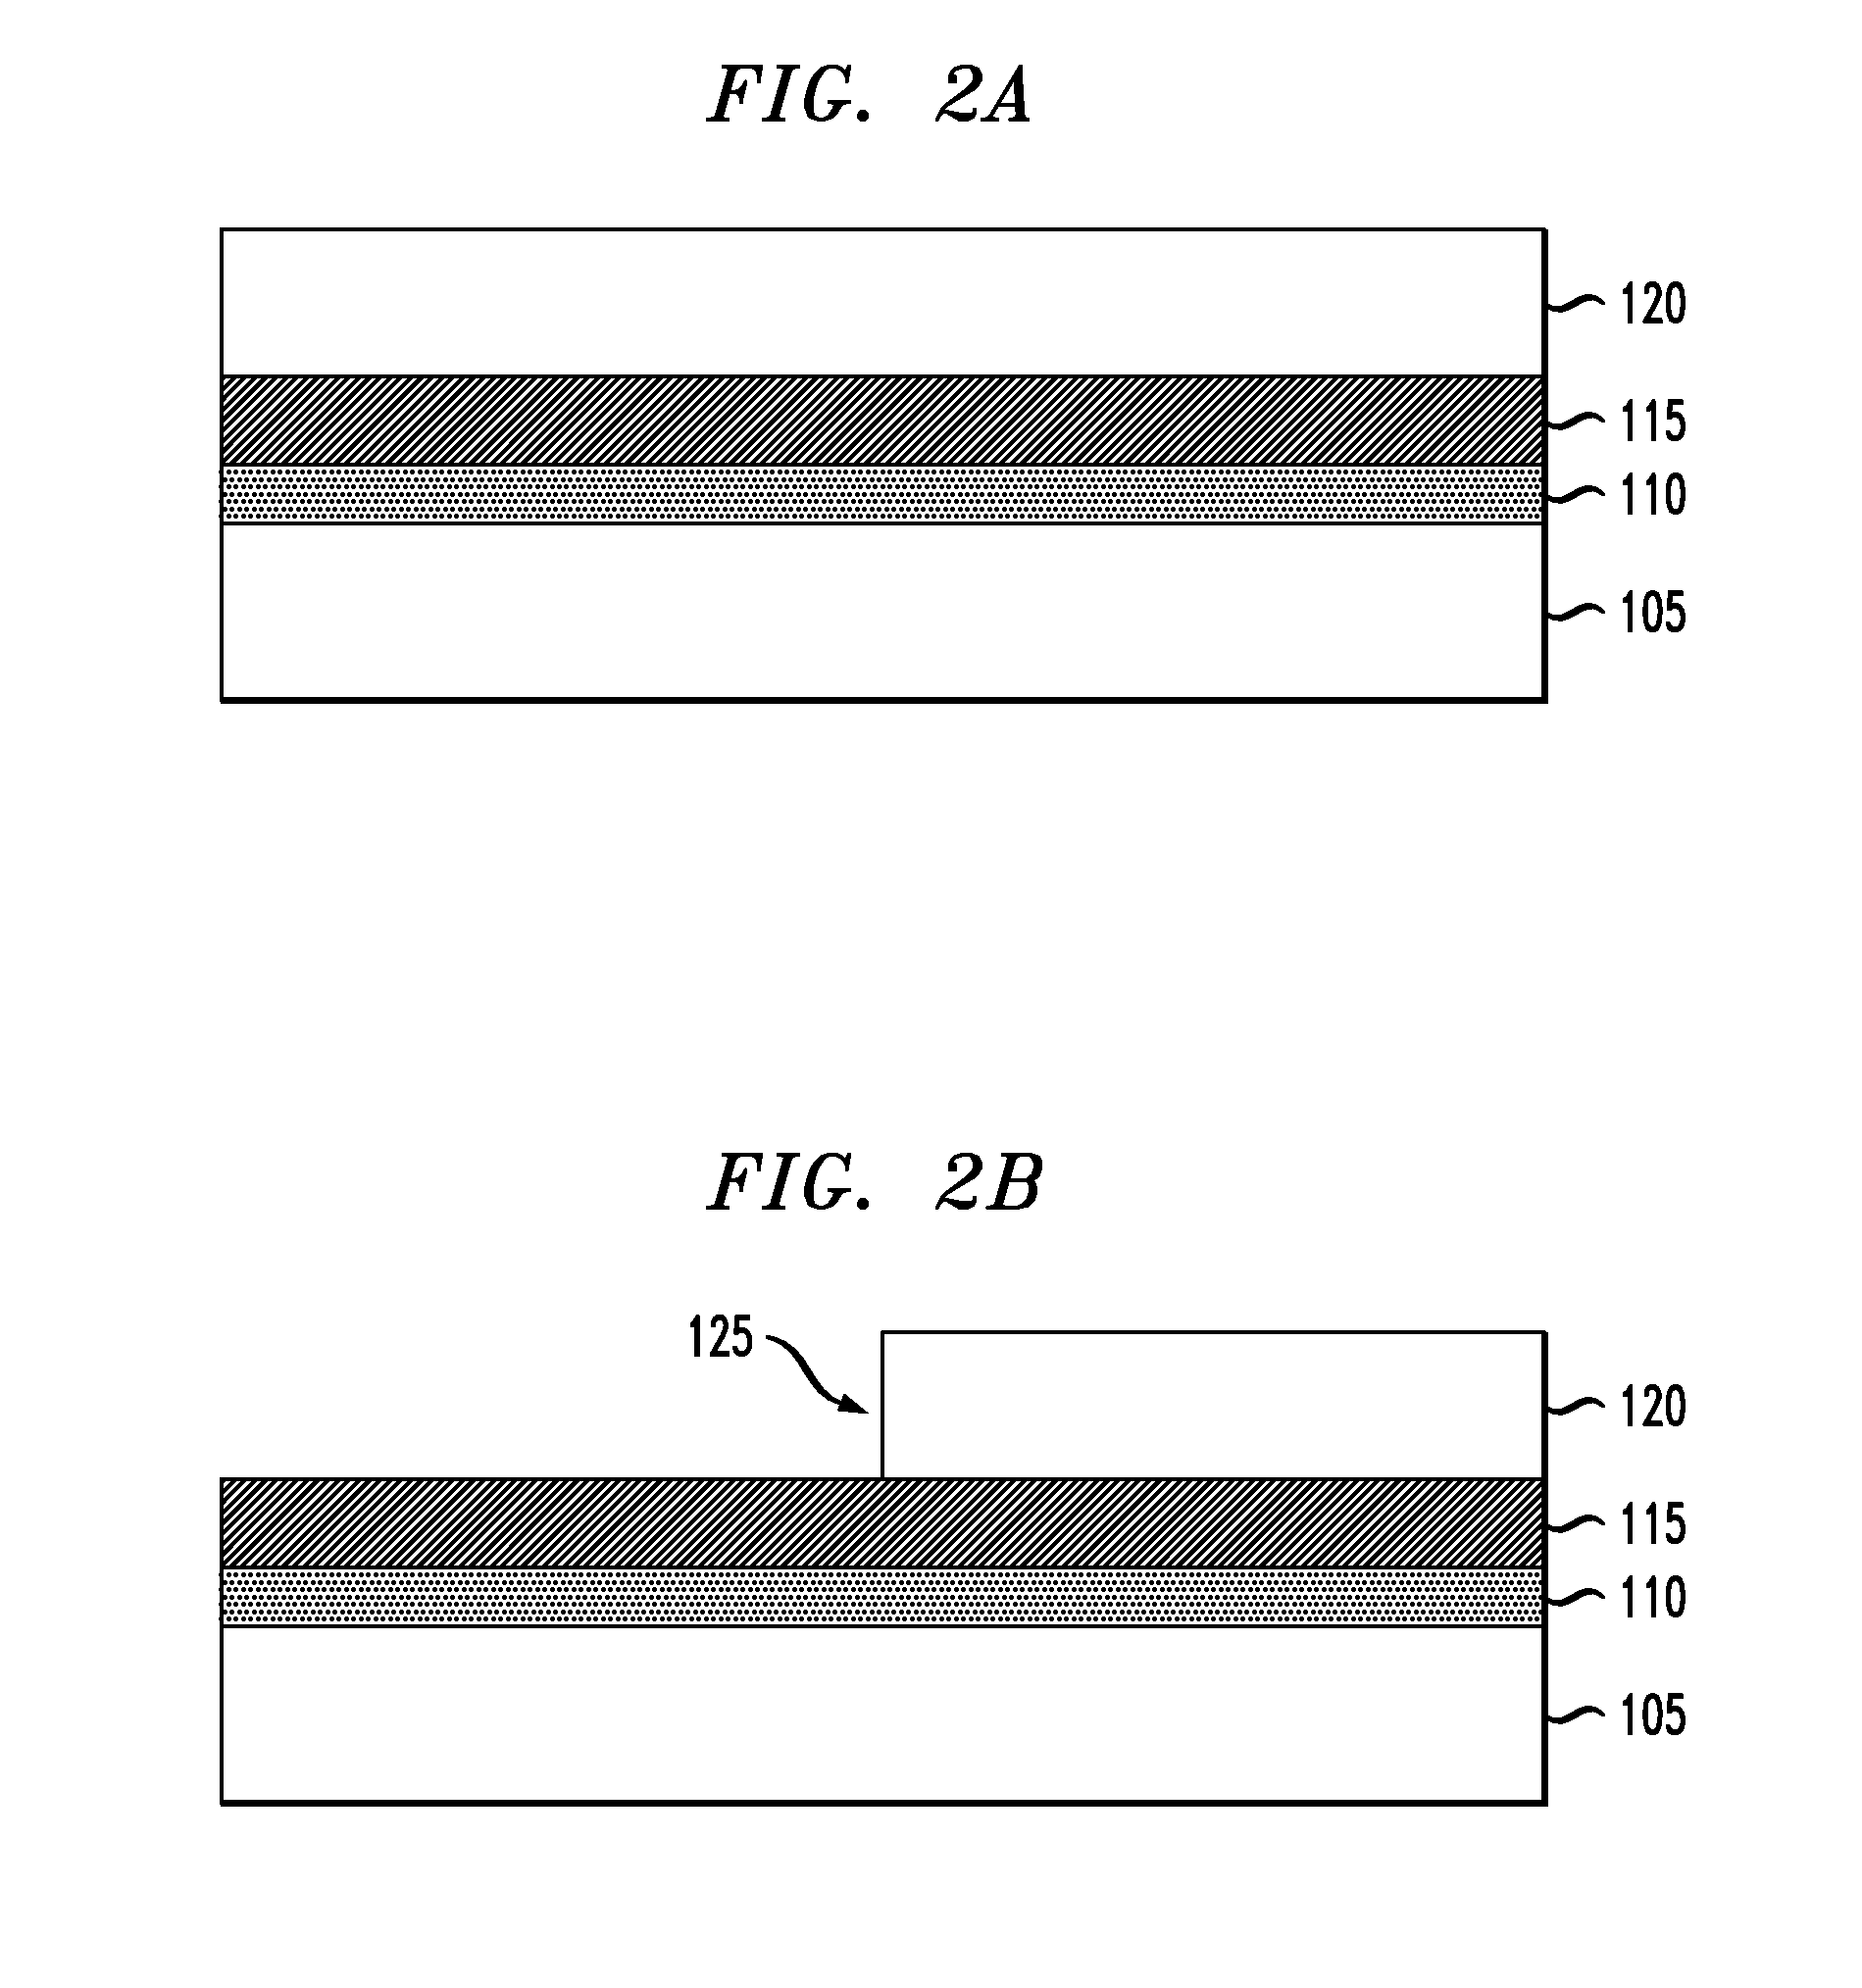 Semiconductor devices having nanochannels confined by nanometer-spaced electrodes